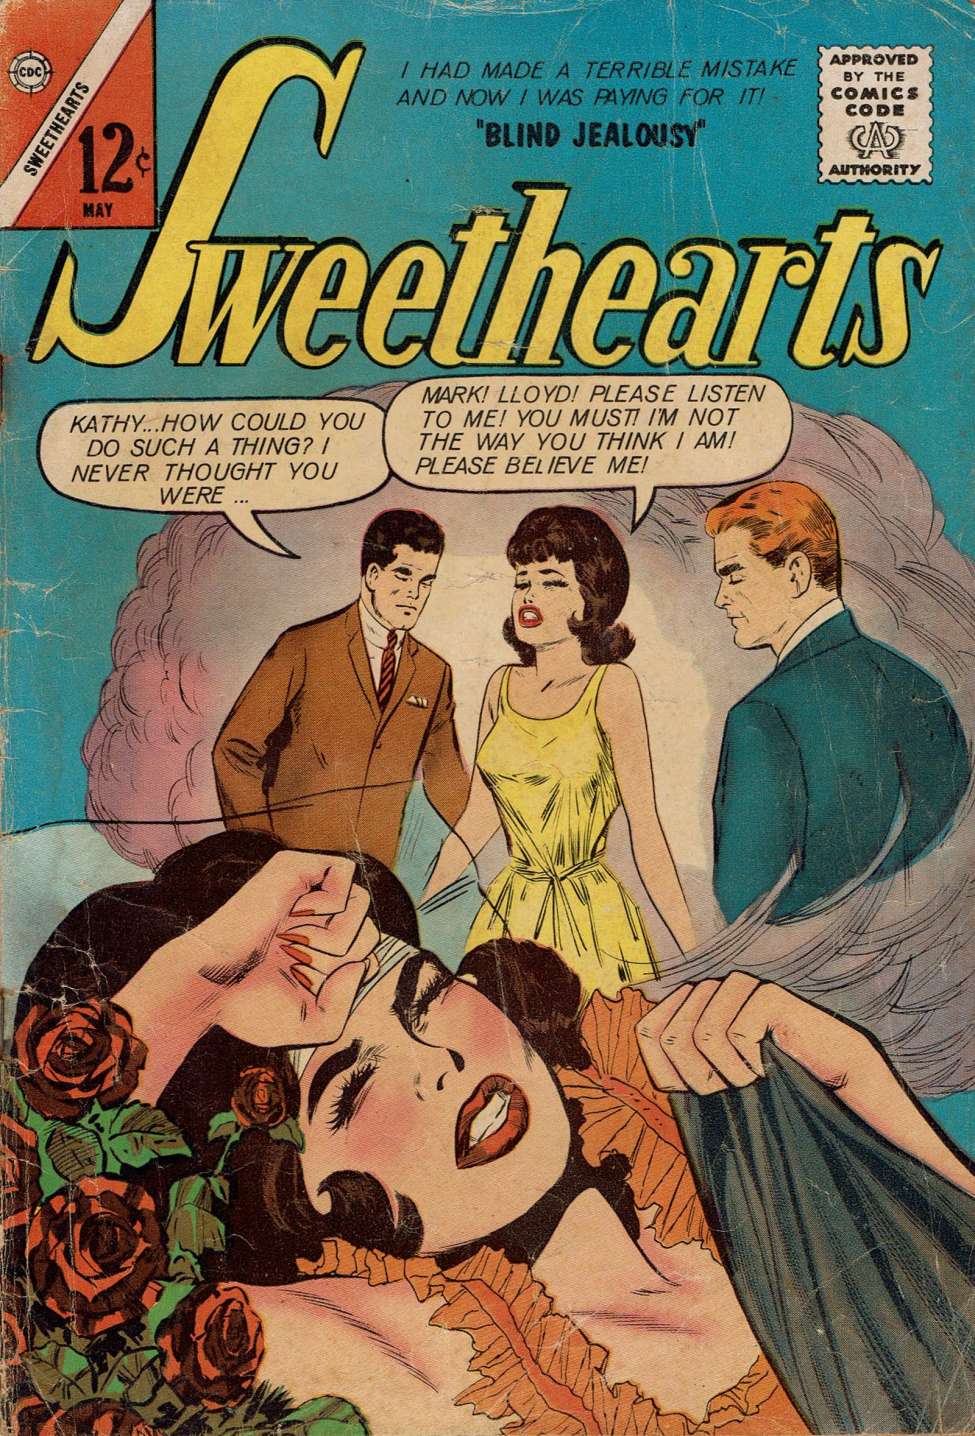 Book Cover For Sweethearts 71